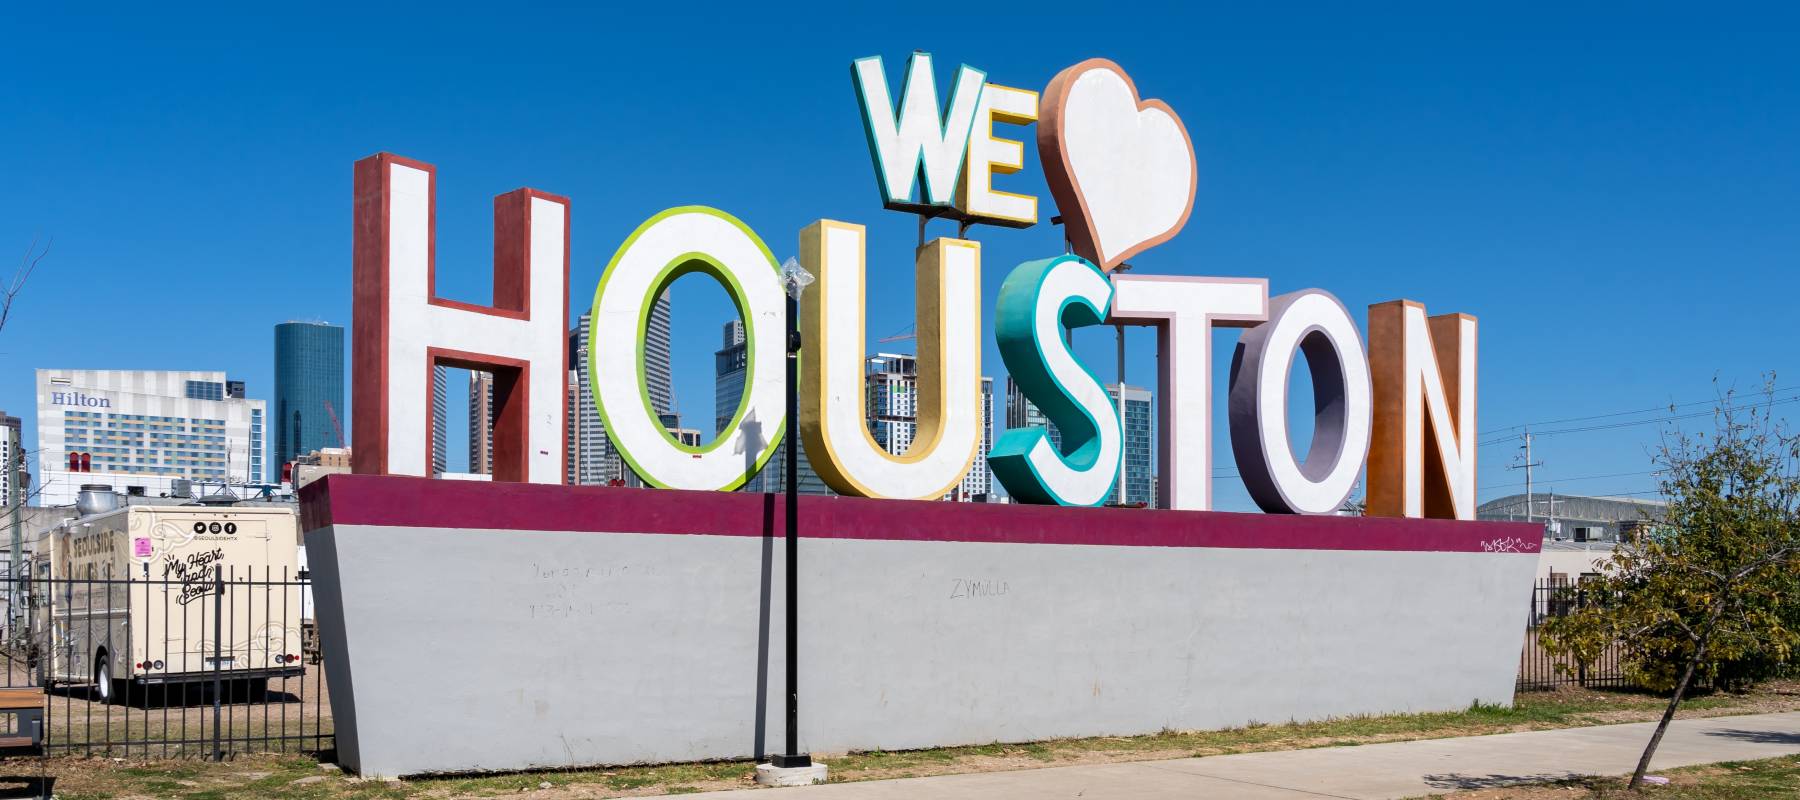 A sign that says ‘We Love Houston’ with Downtown Houston in the background